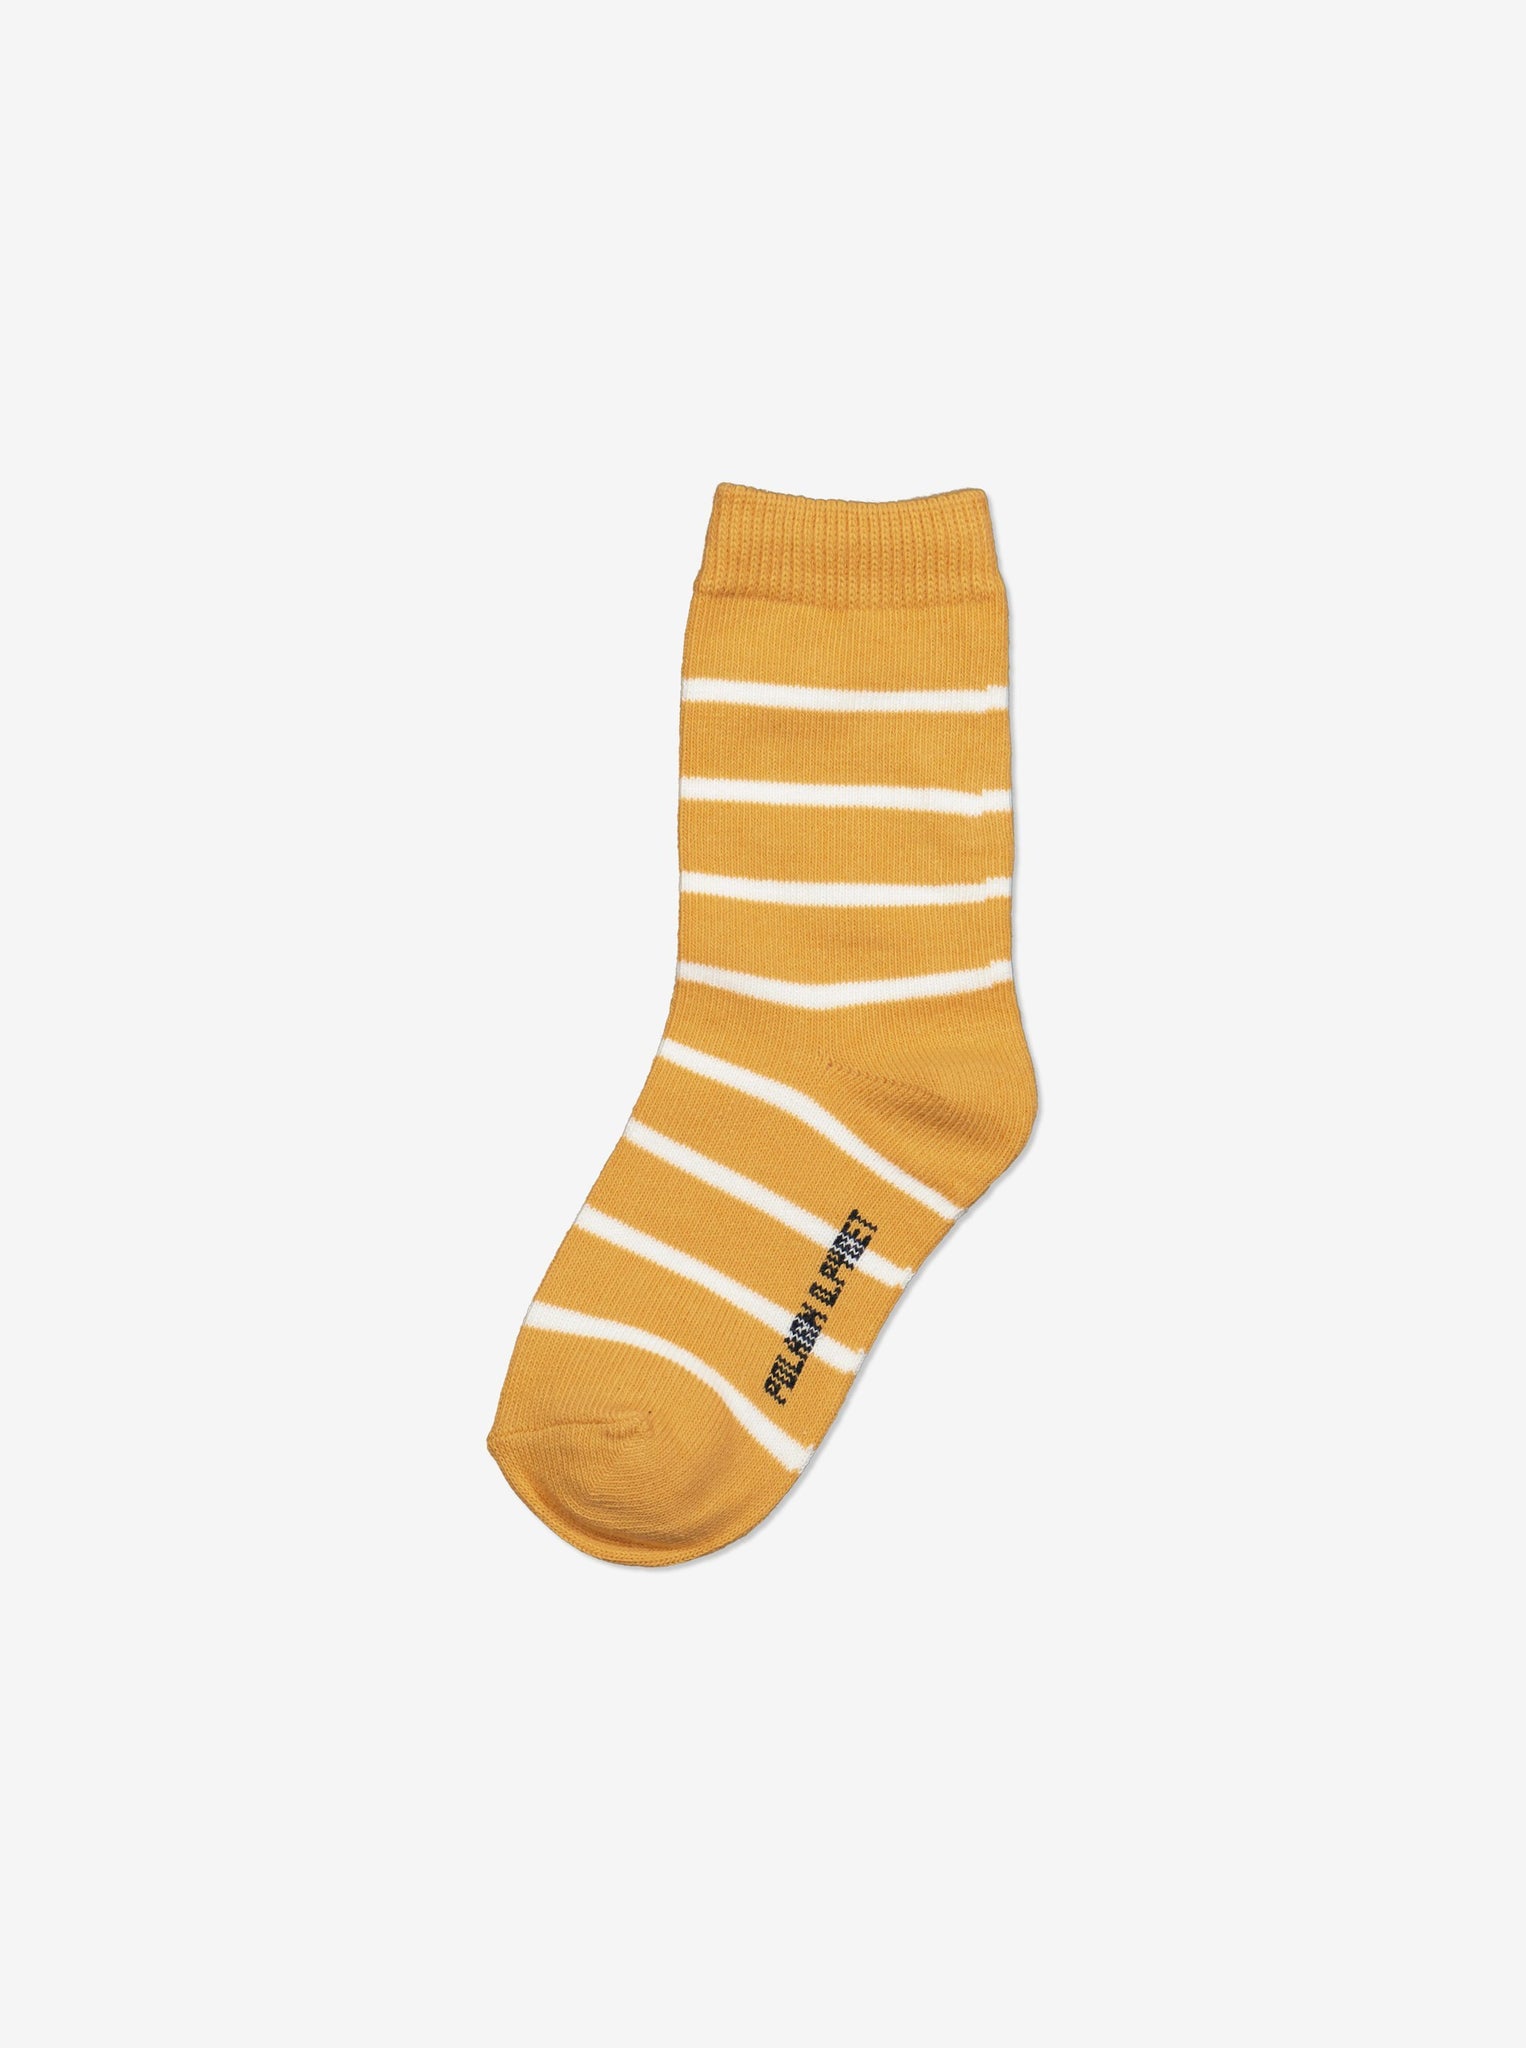  Organic Yellow Kids Socks Multipack from Polarn O. Pyret Kidswear. Made from sustainable materials.